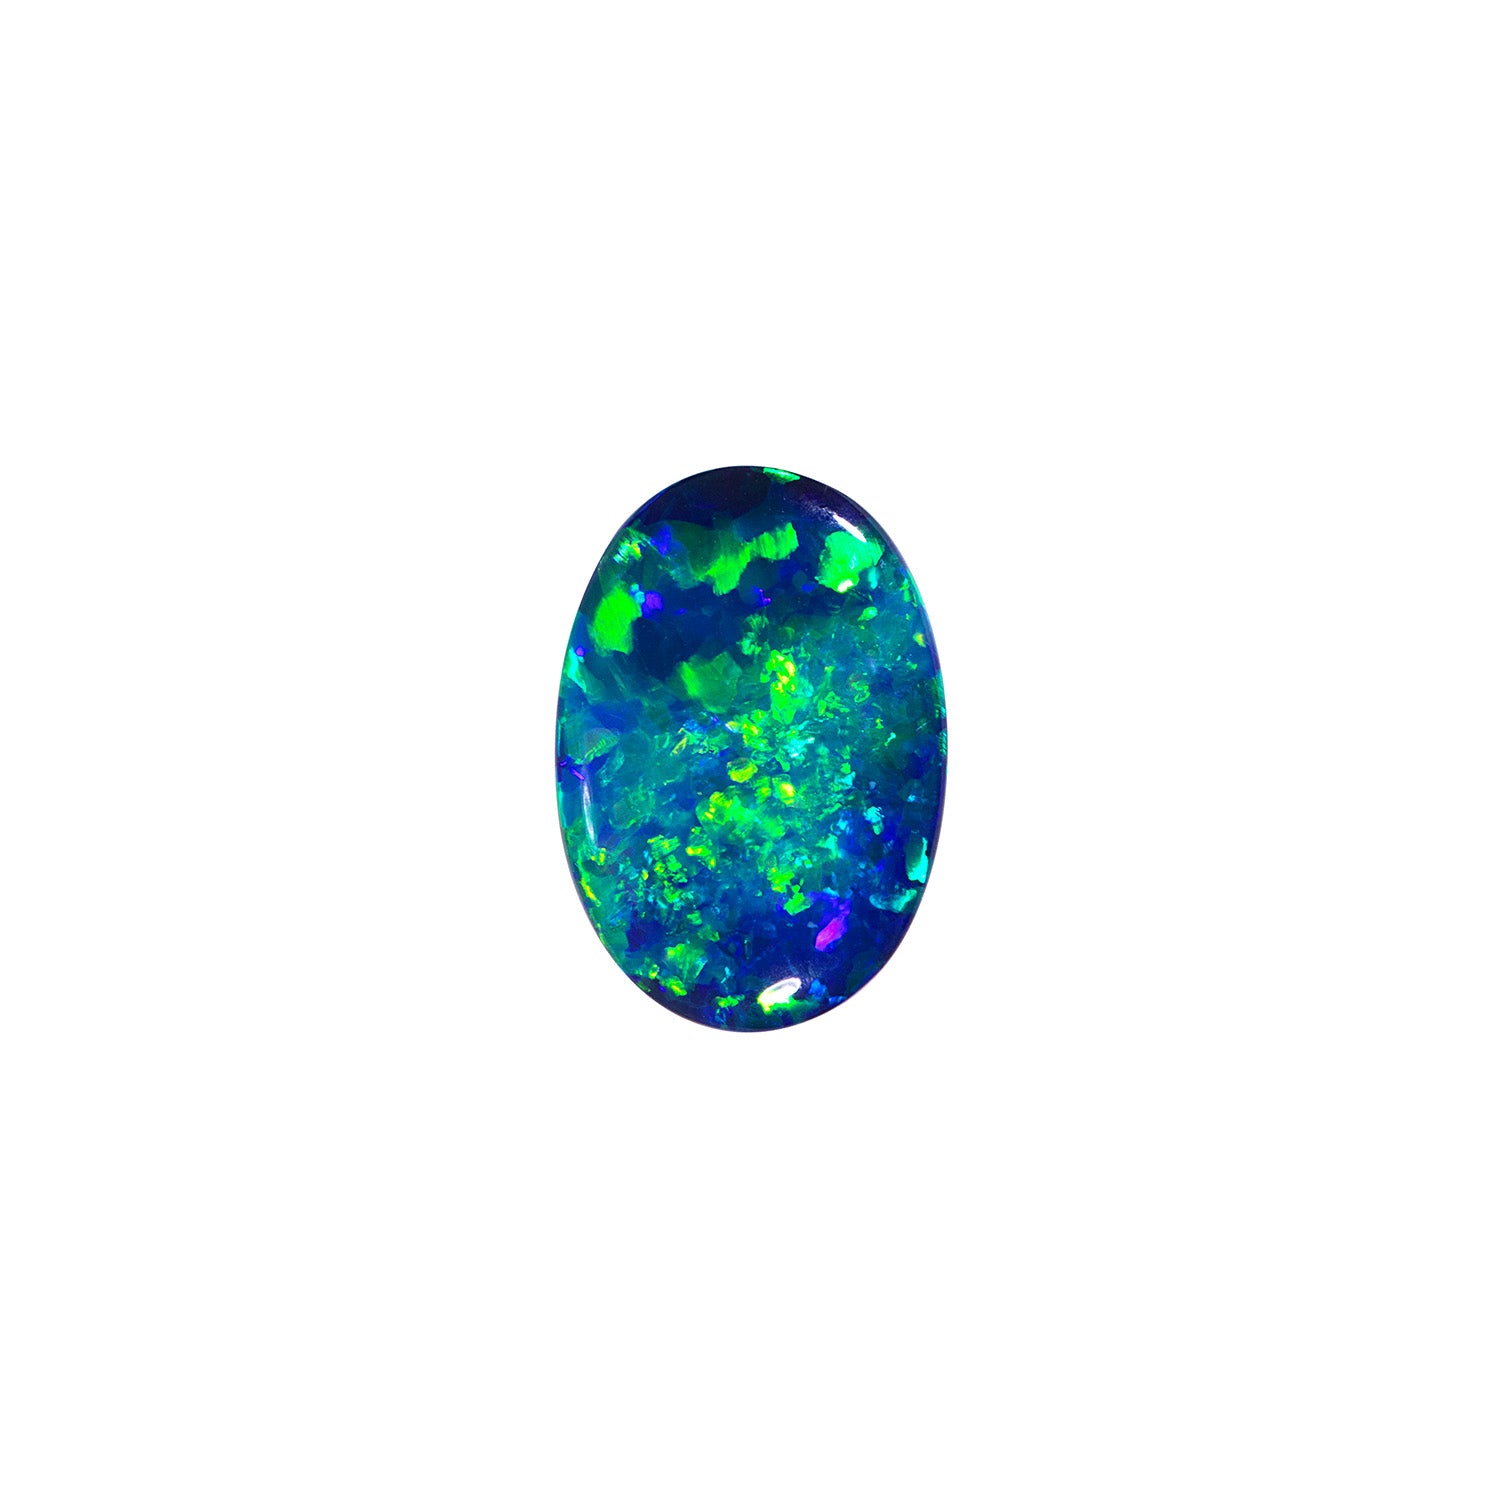 1.85 carat Australian black opal, 10.7 x 9 x 3.2 millimeters, showcasing stunning blue and green hues. Ideal for a unique jewelry piece.